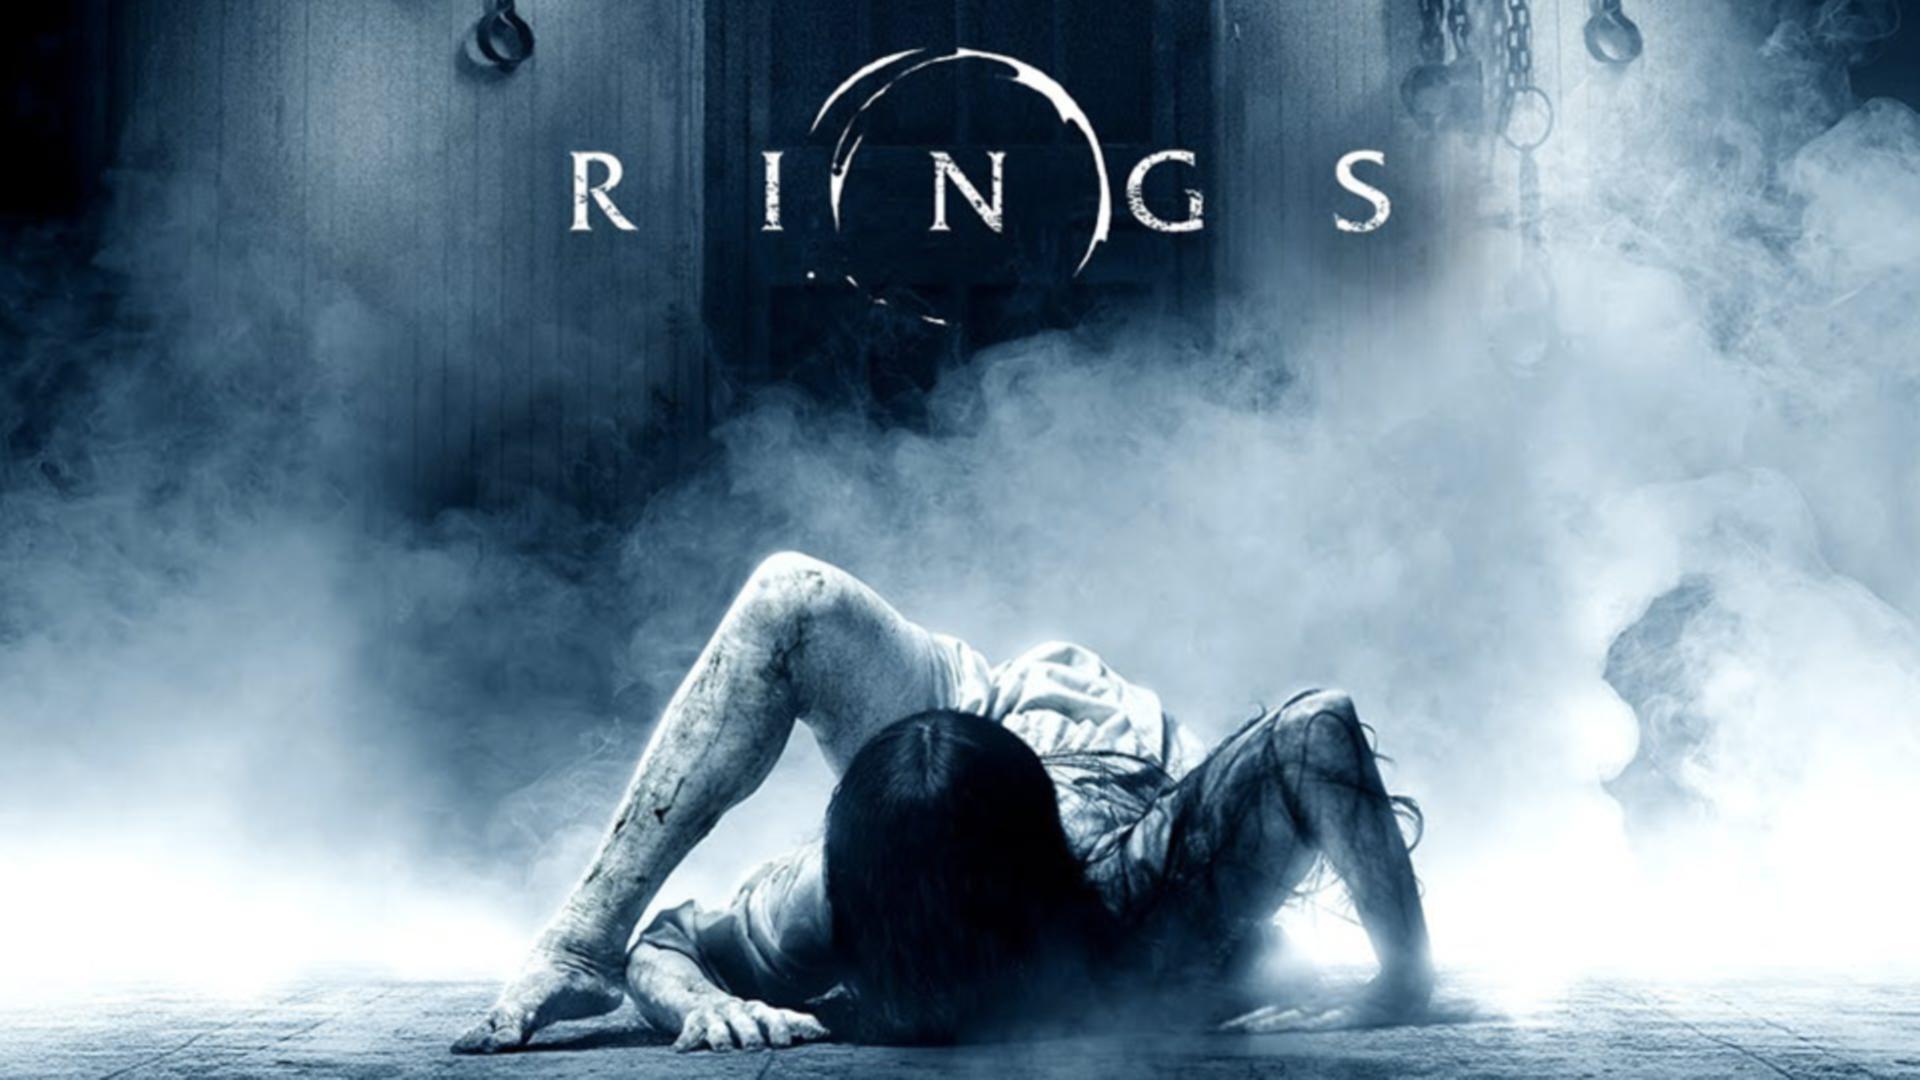 Watch The Frightening Opening 3 Minutes of New Rings Horror Sequel